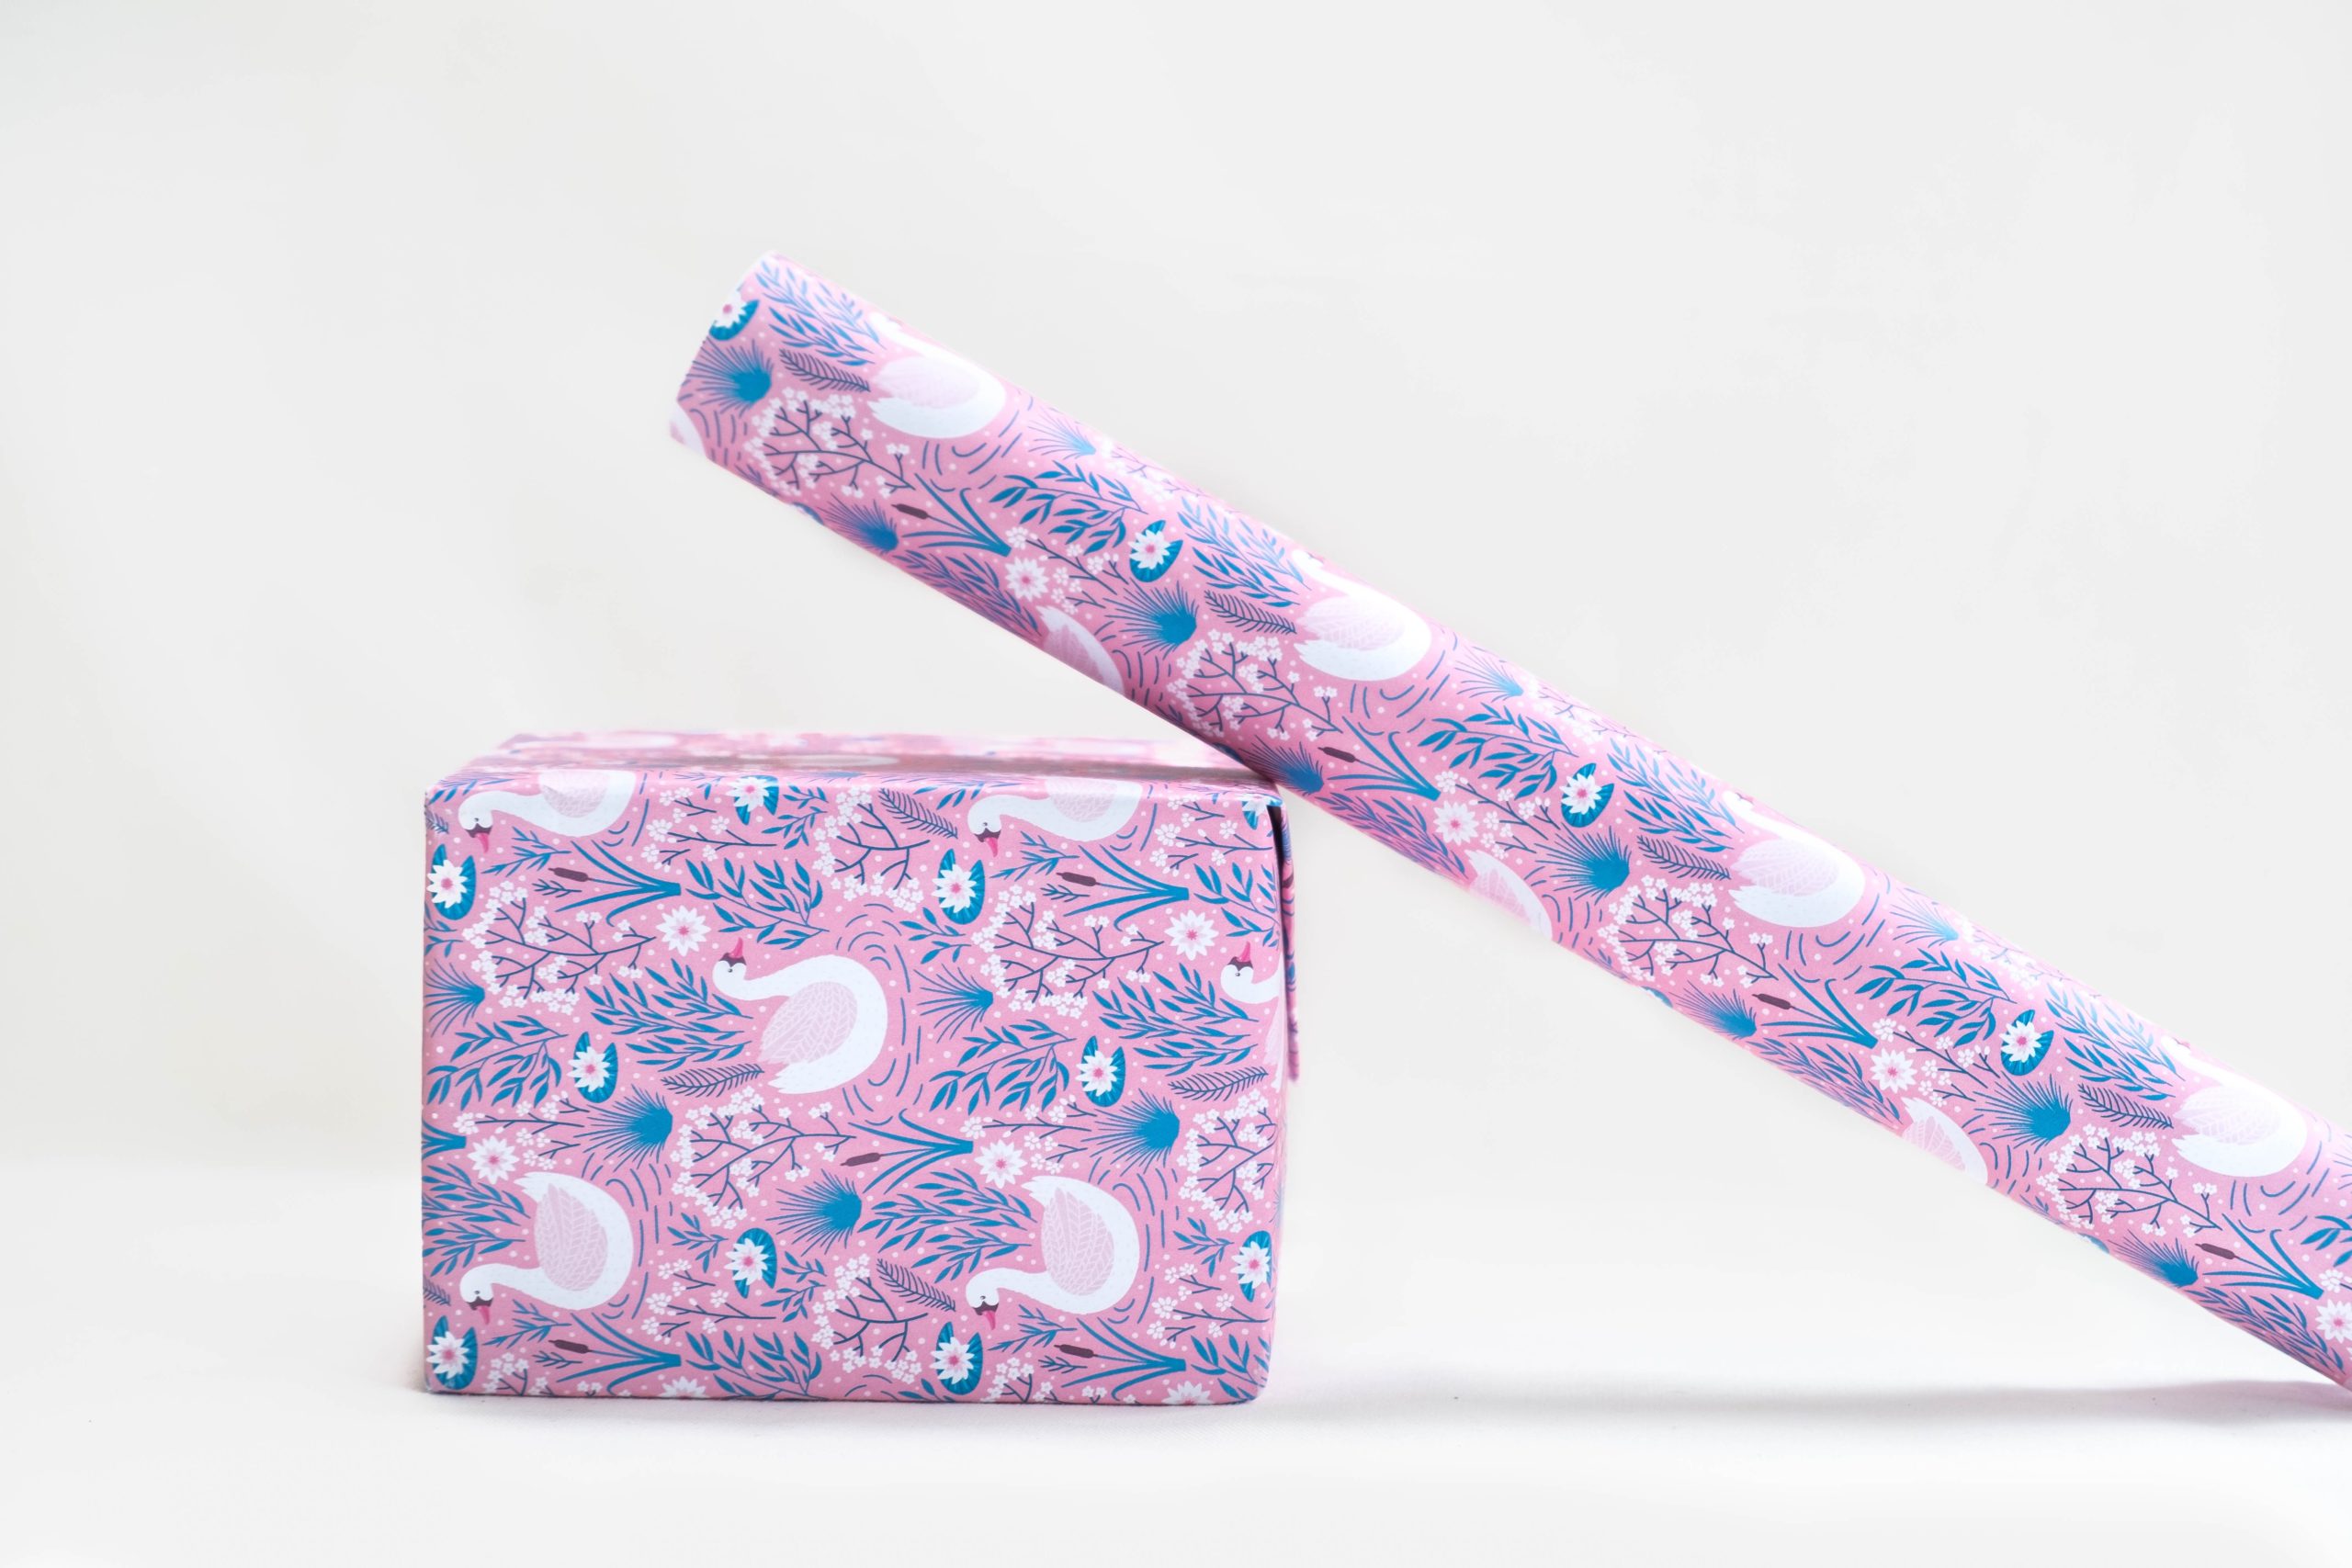 Lilac and blue wrapping paper that has covered a box part of a gift wrapping fundraiser